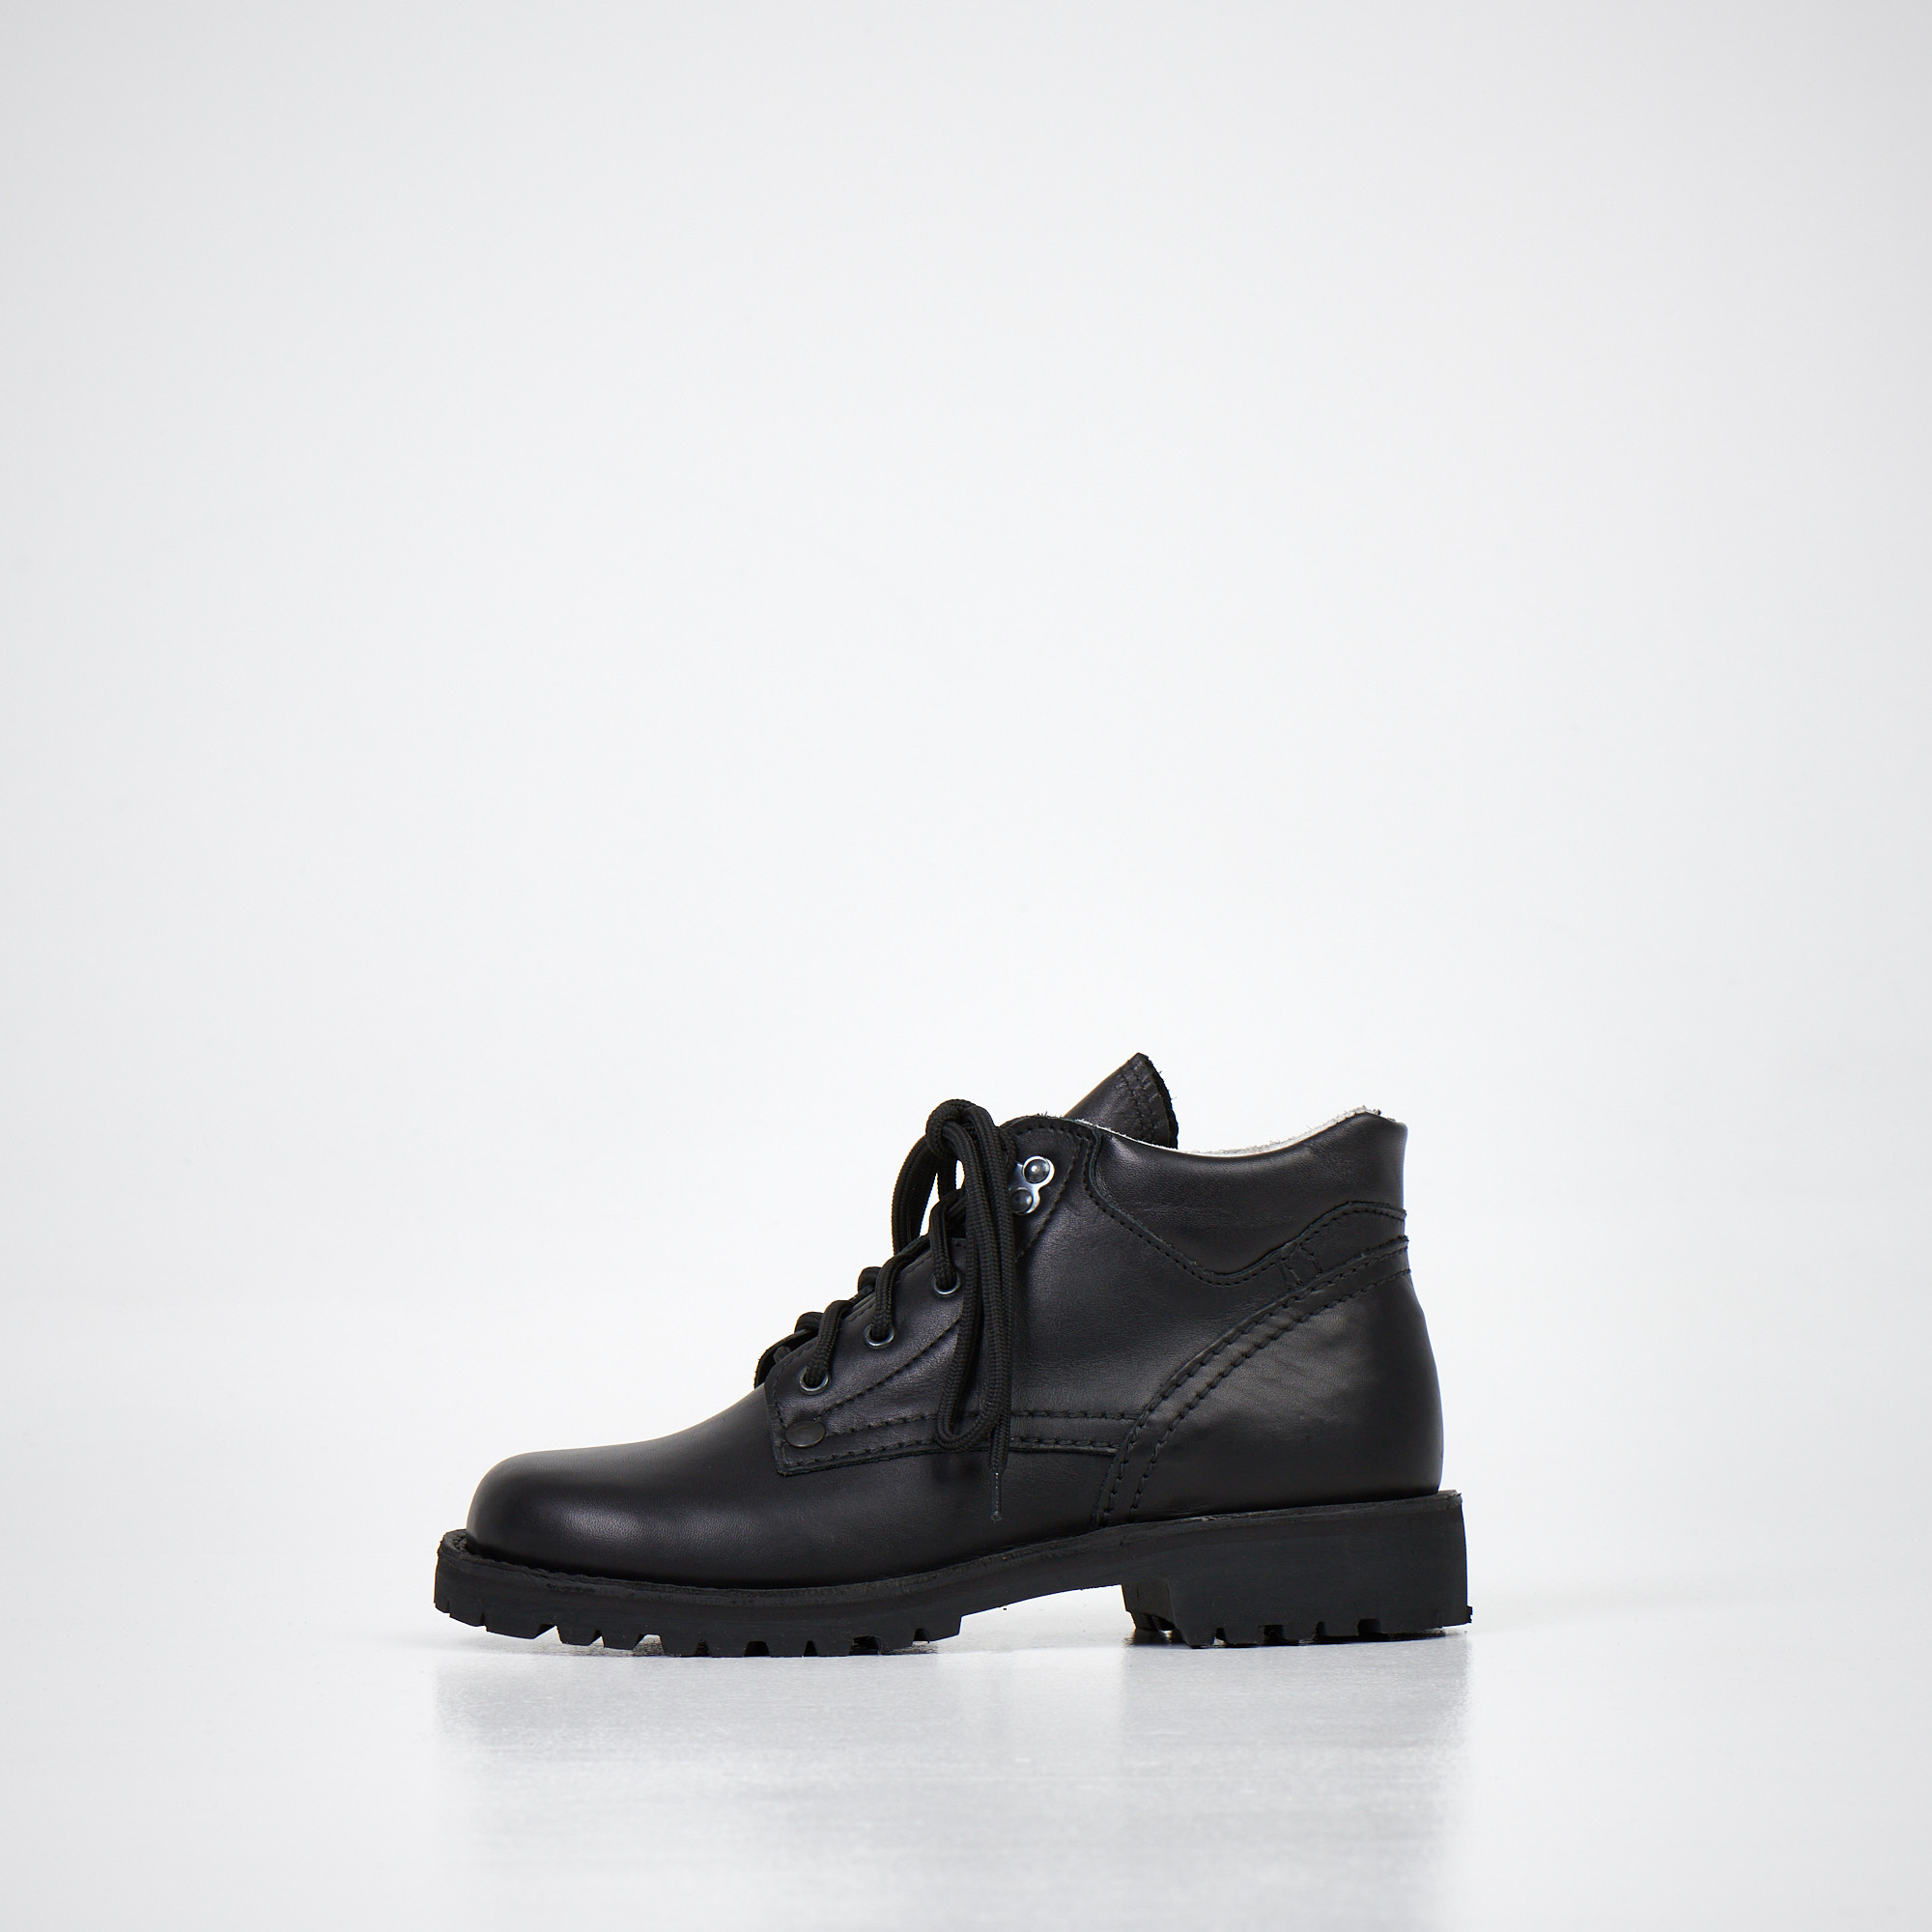 AIPI Handmade Ankle Boots - Black. Nilkkurisaappaat.